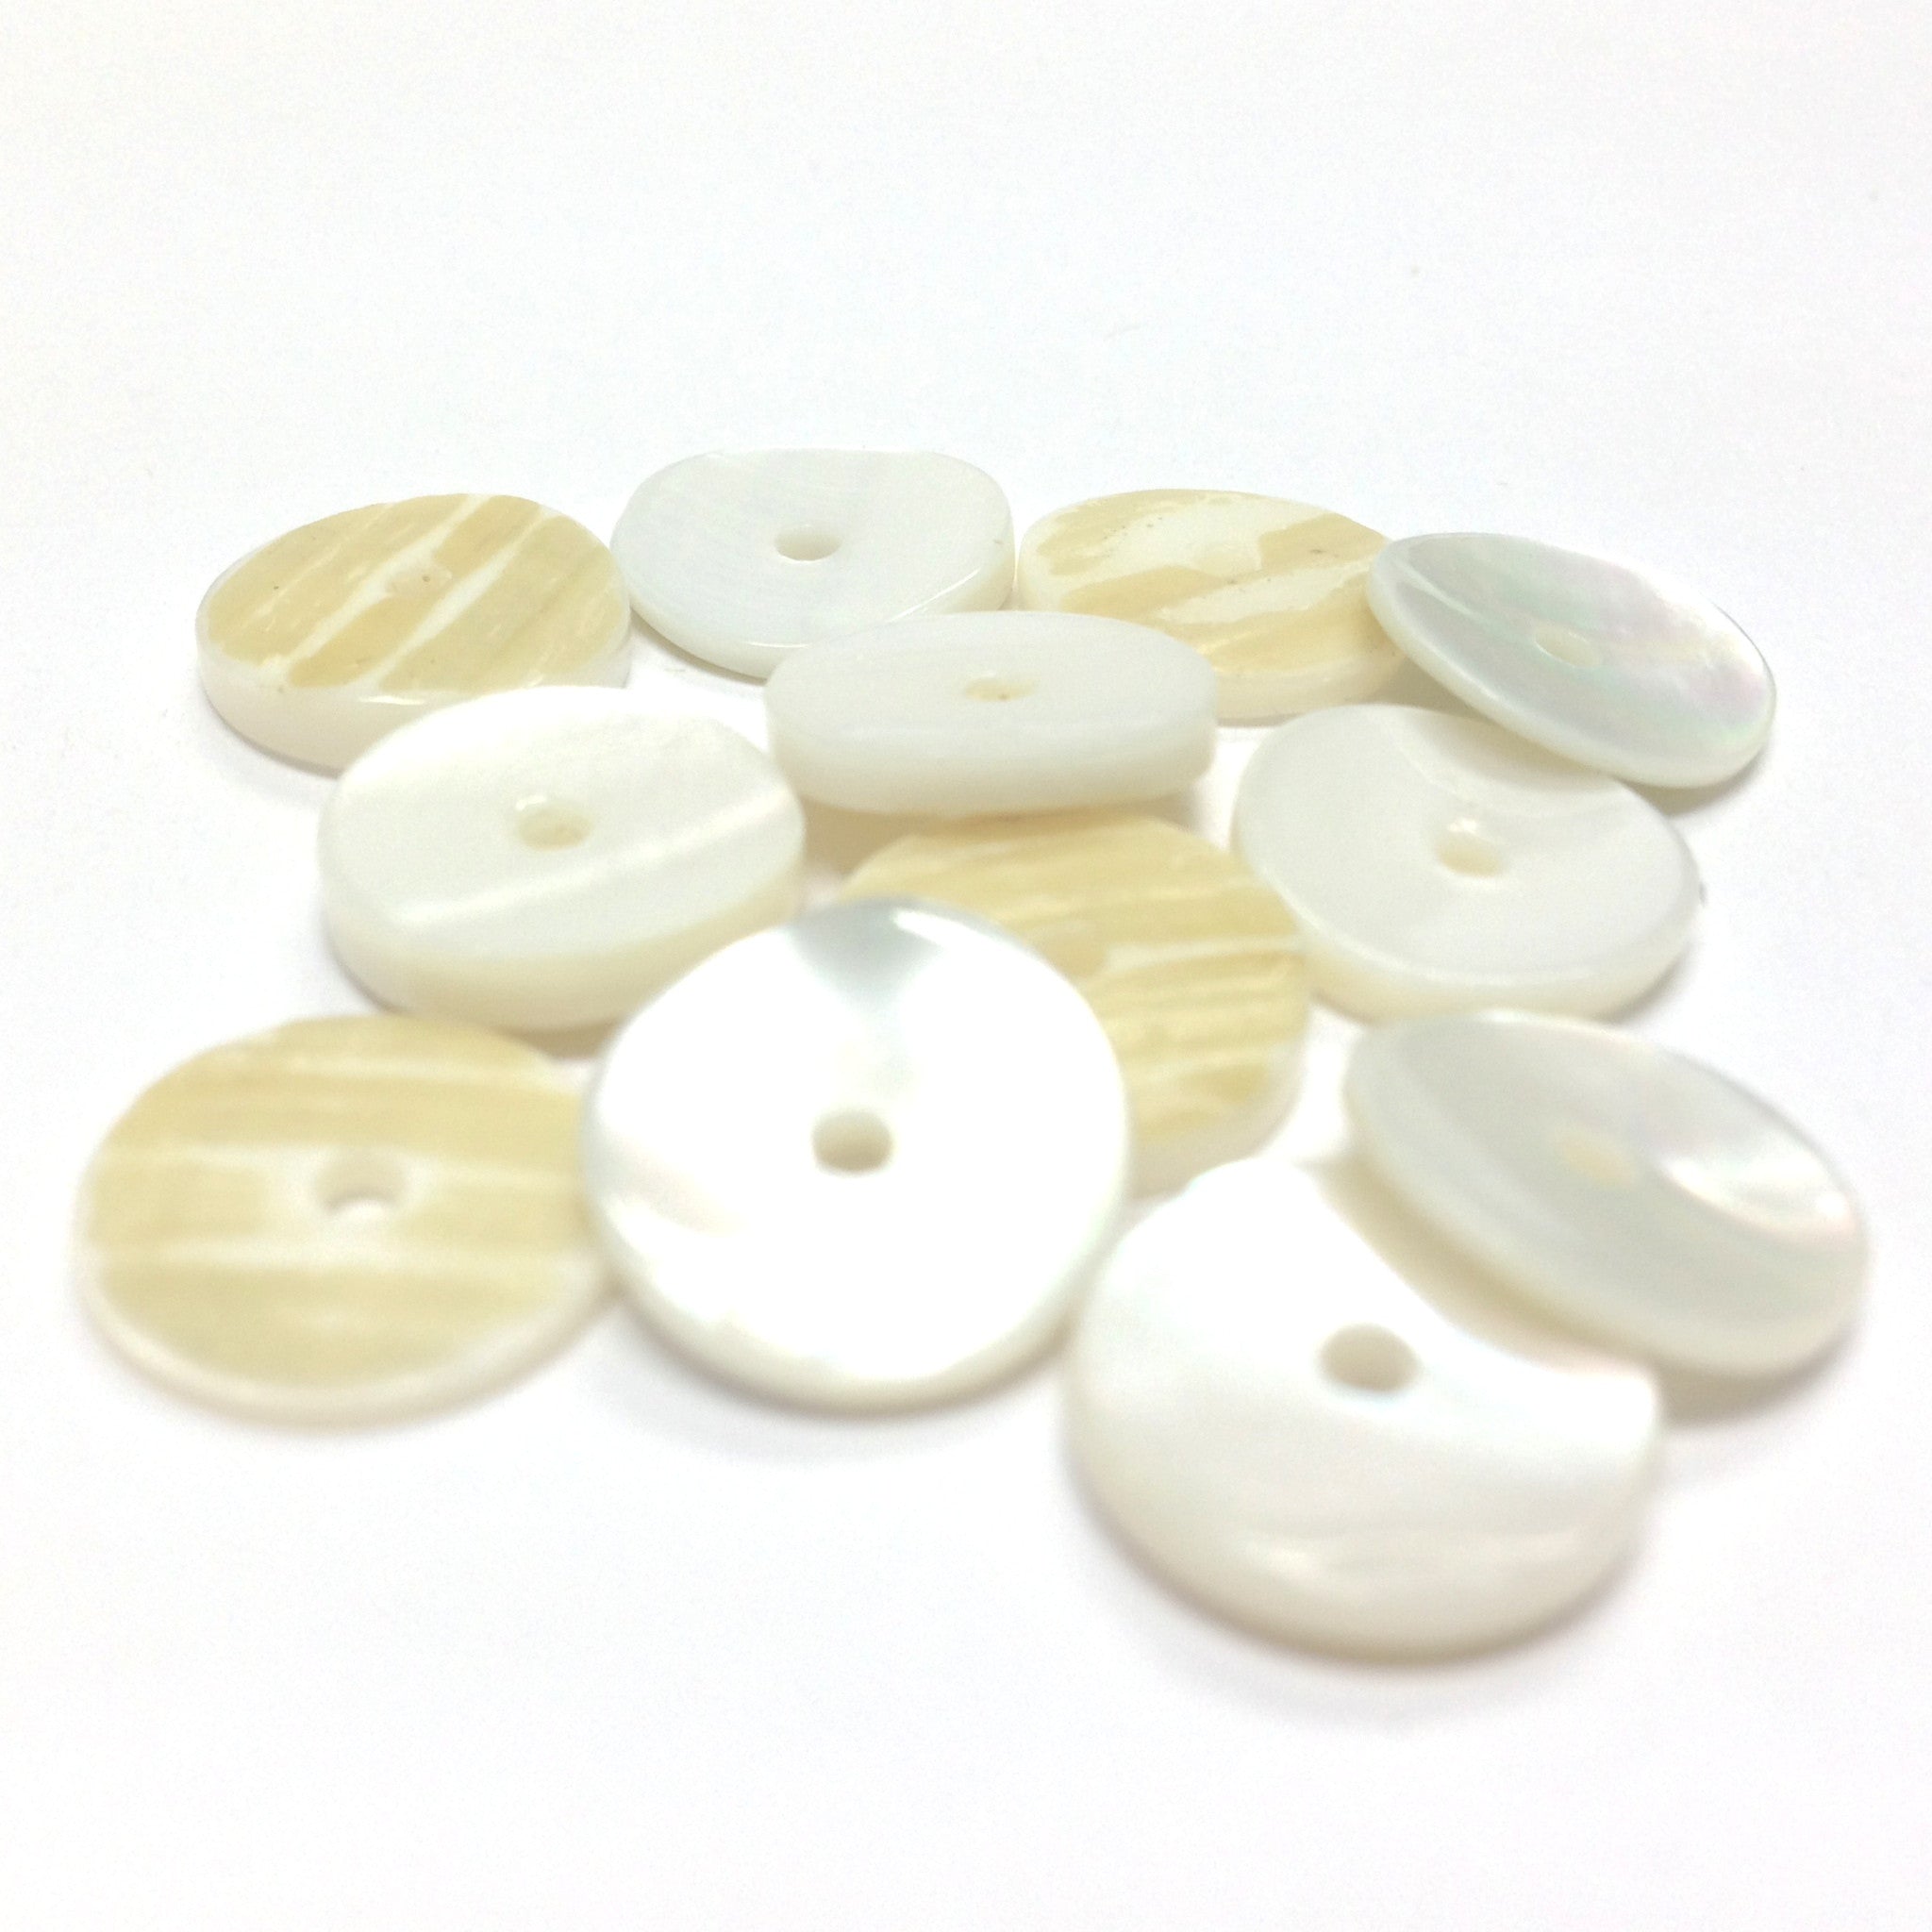 4mm Thickness Mother of Pearl (MOP) Buttons, 4-Hole, White